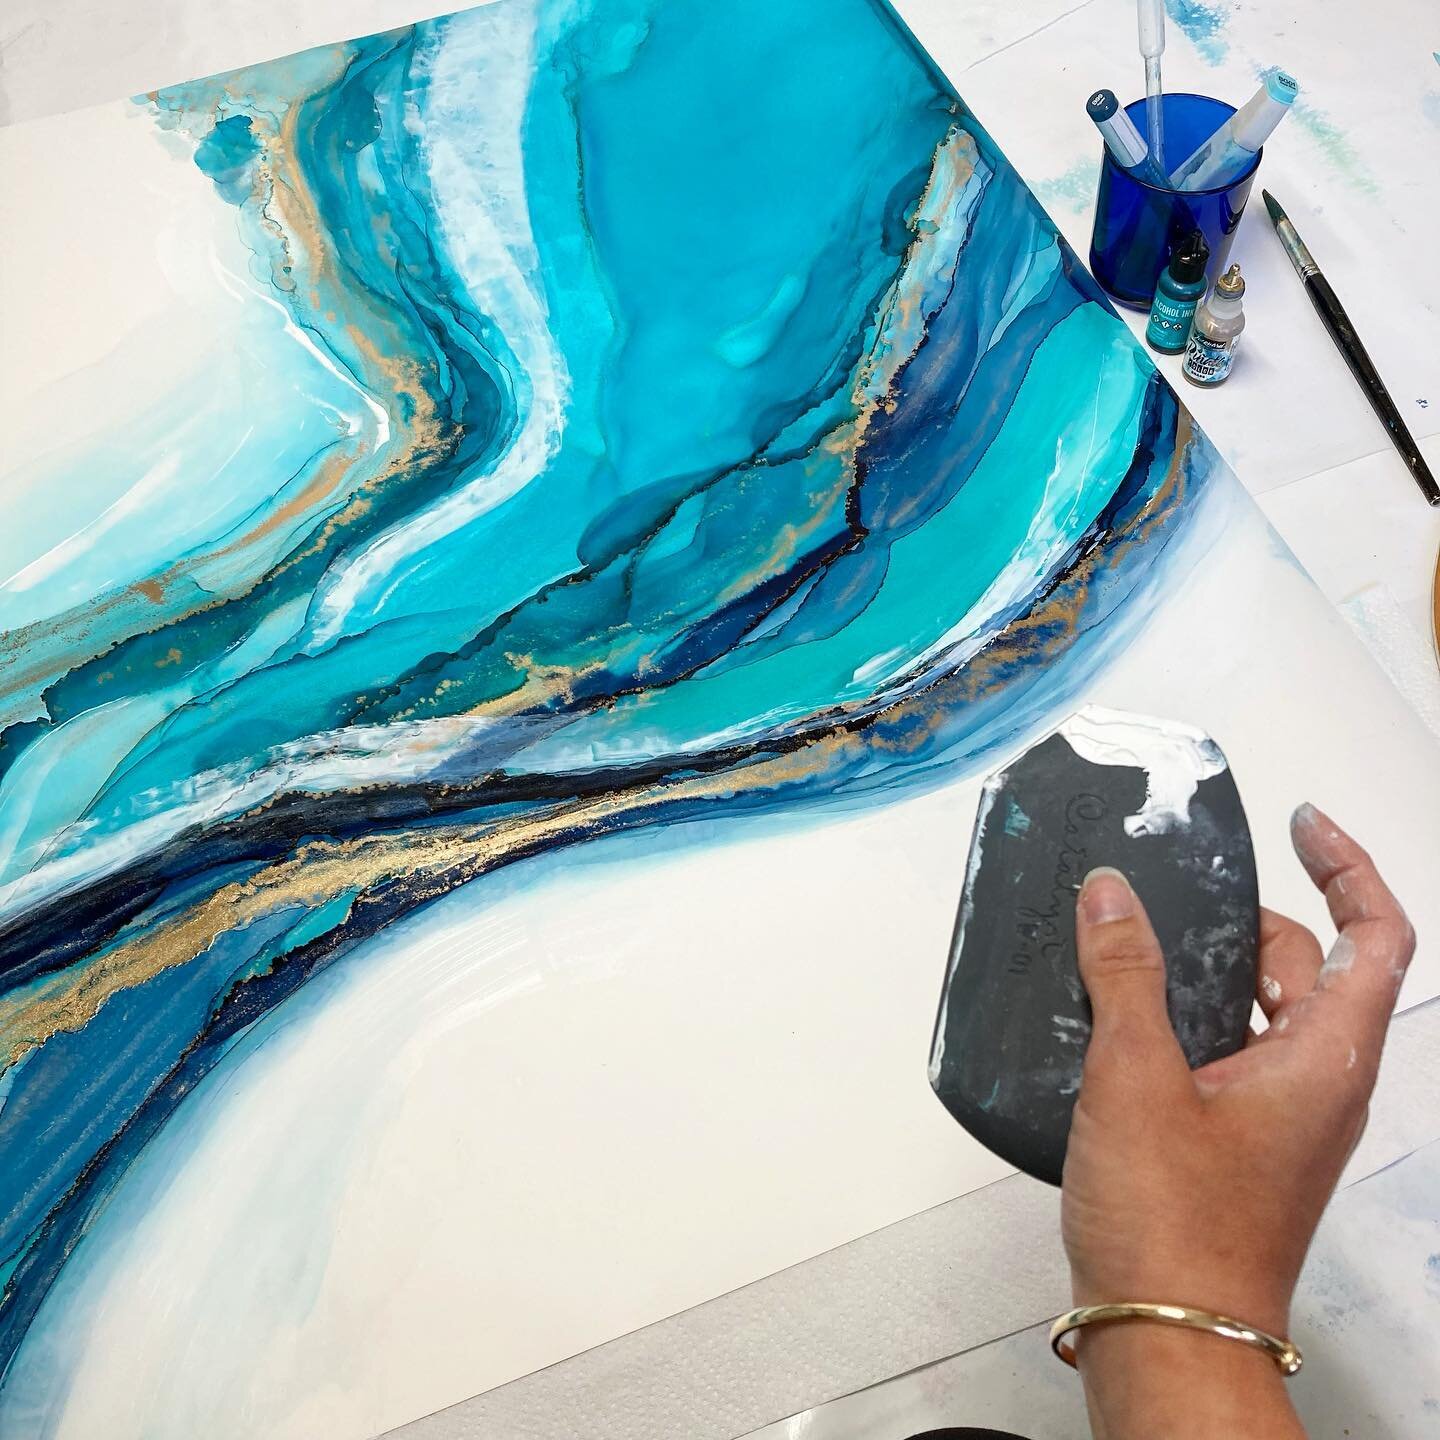 I&rsquo;m working on 2 large paintings in this colour scheme at the moment 🥰

I love the flow and movement of them and can&rsquo;t get enough of those gorgeous blues! 😍 I&rsquo;ve been experimenting with adding touches of white paint as layers on t